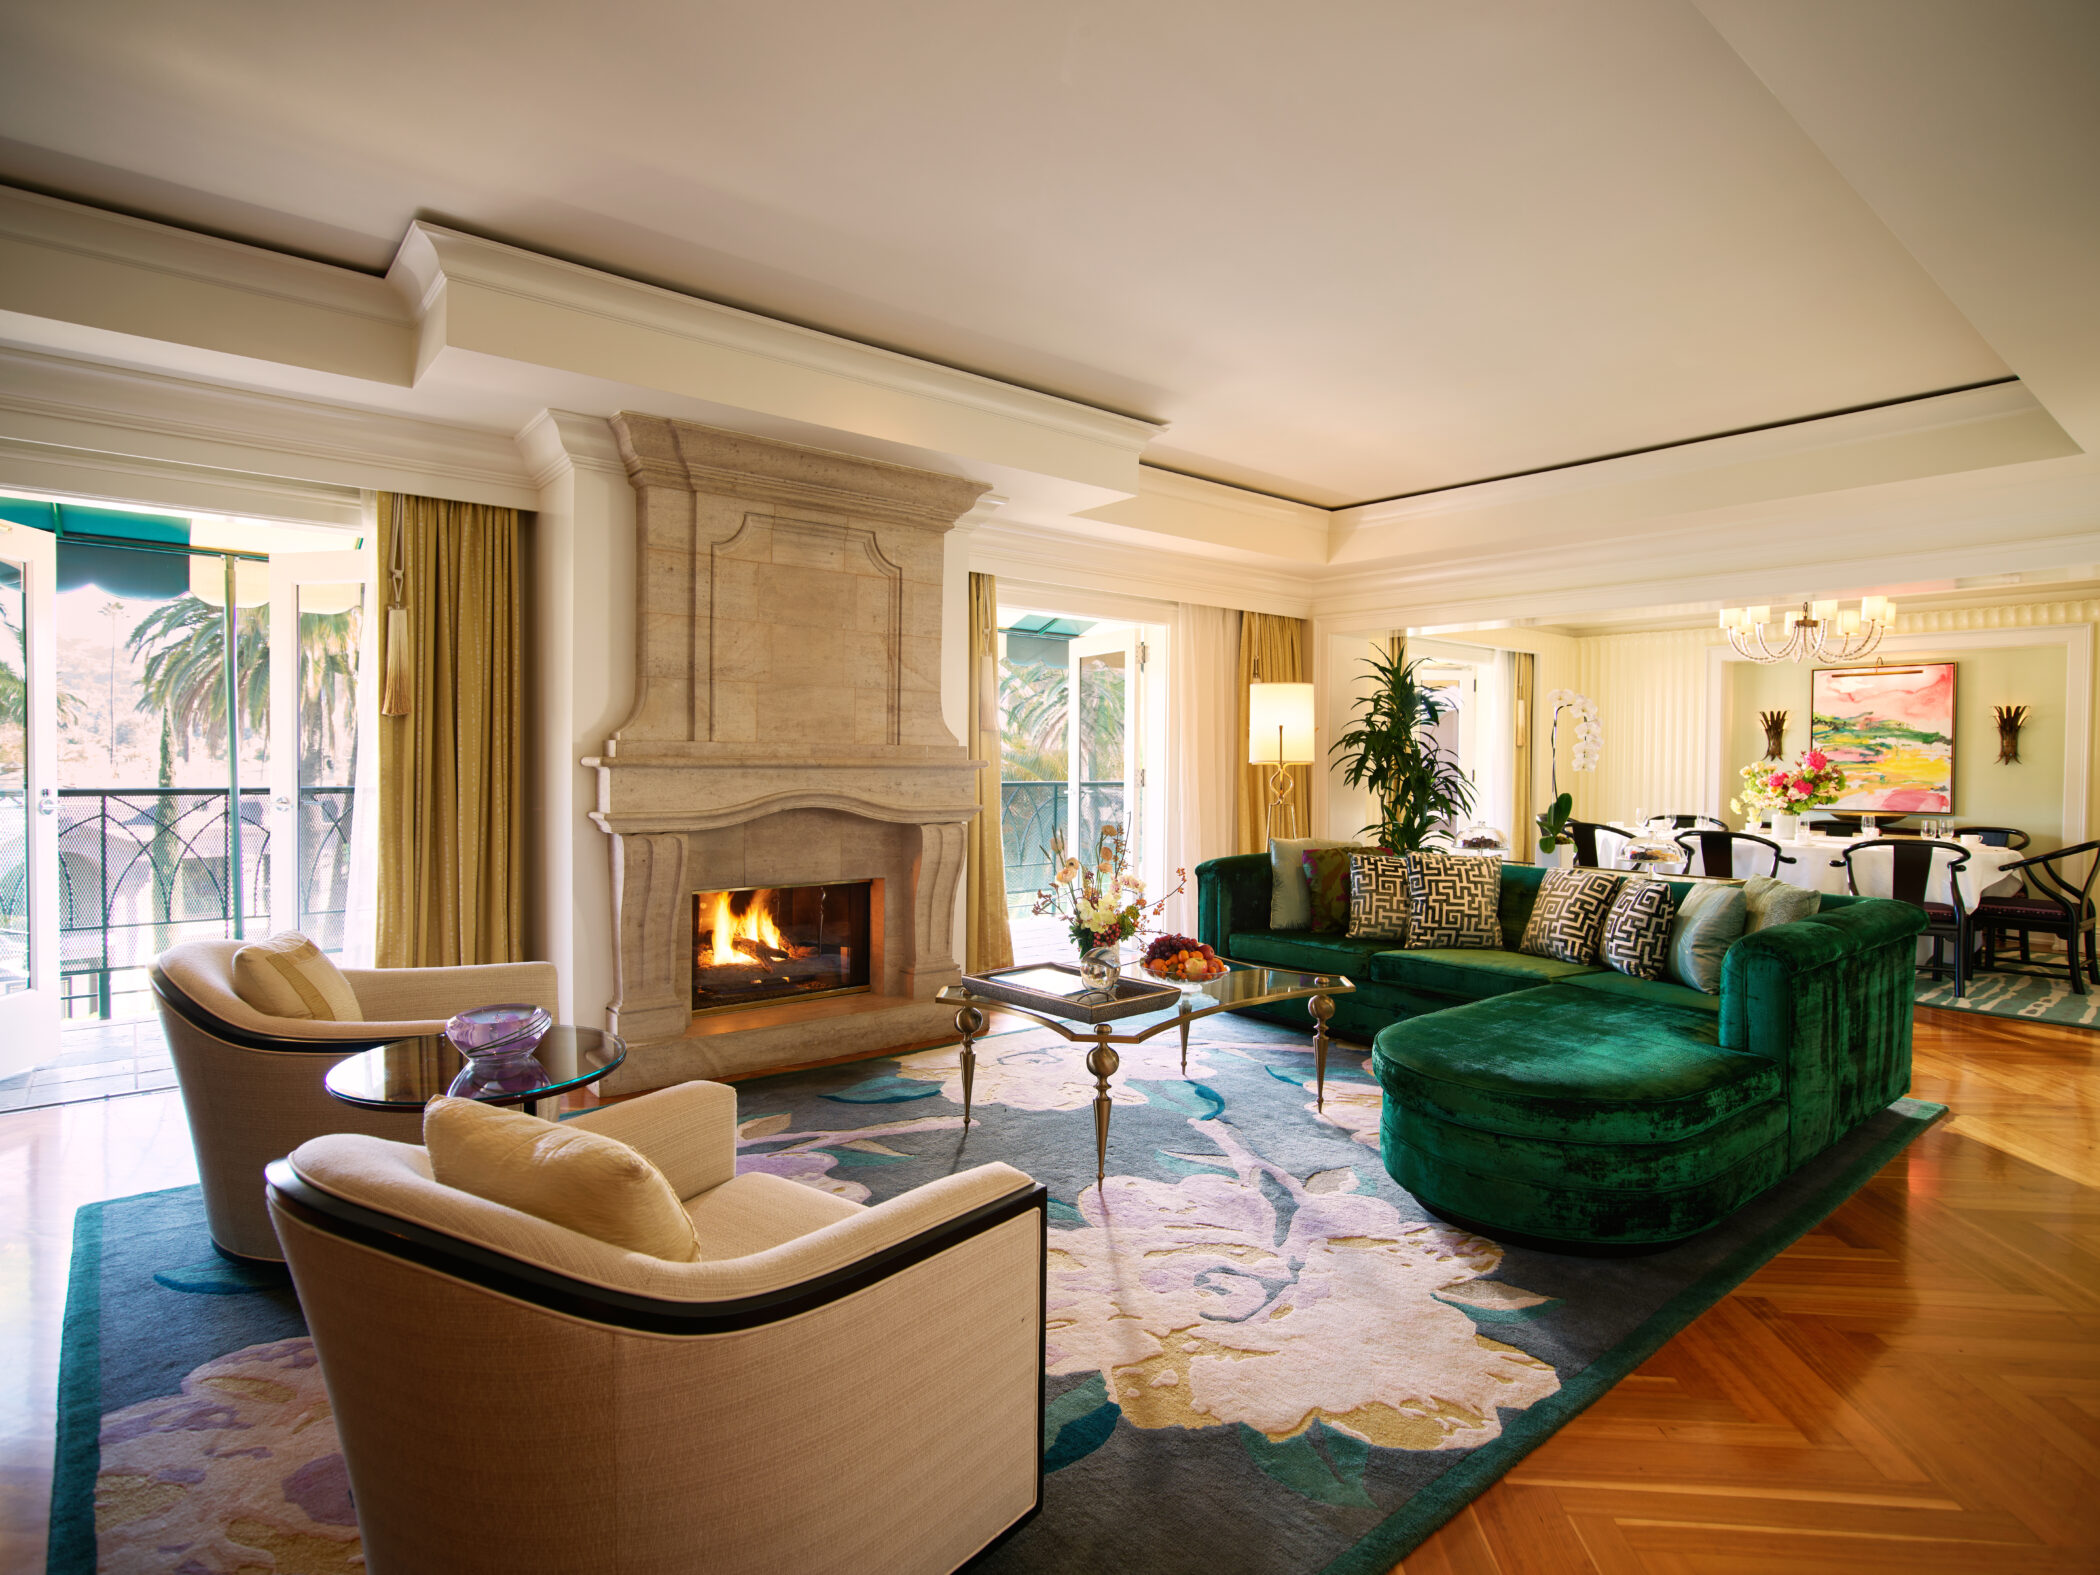 Beverly Hills Hotel, Dorchester Collection